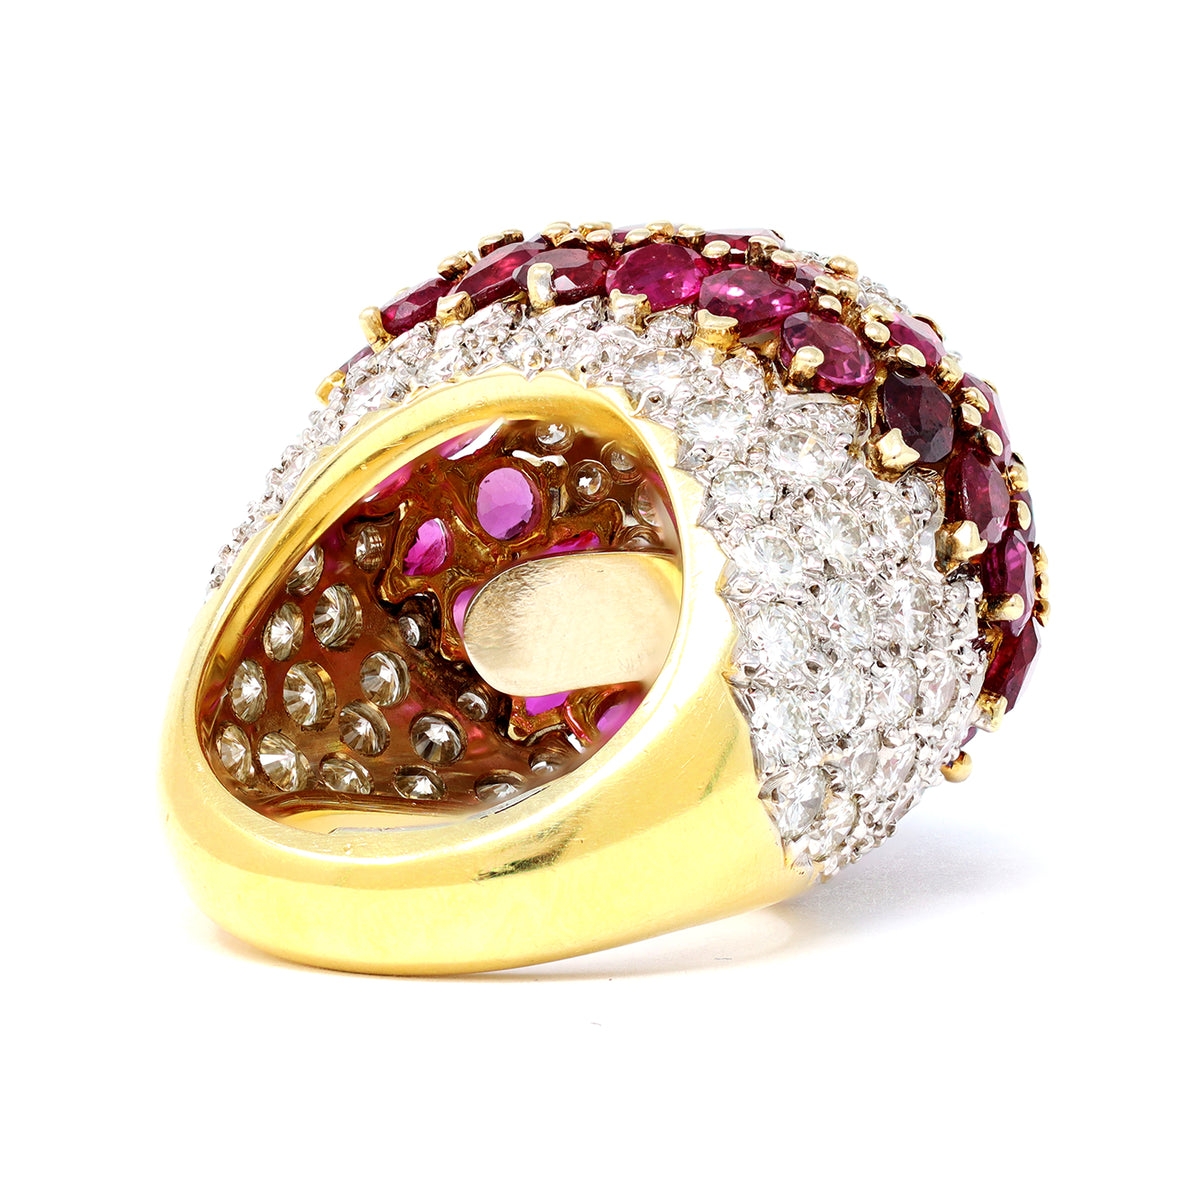 Important Diamond and Ruby Dome Cocktail Ring 18 Karat circa 1970 galleria view